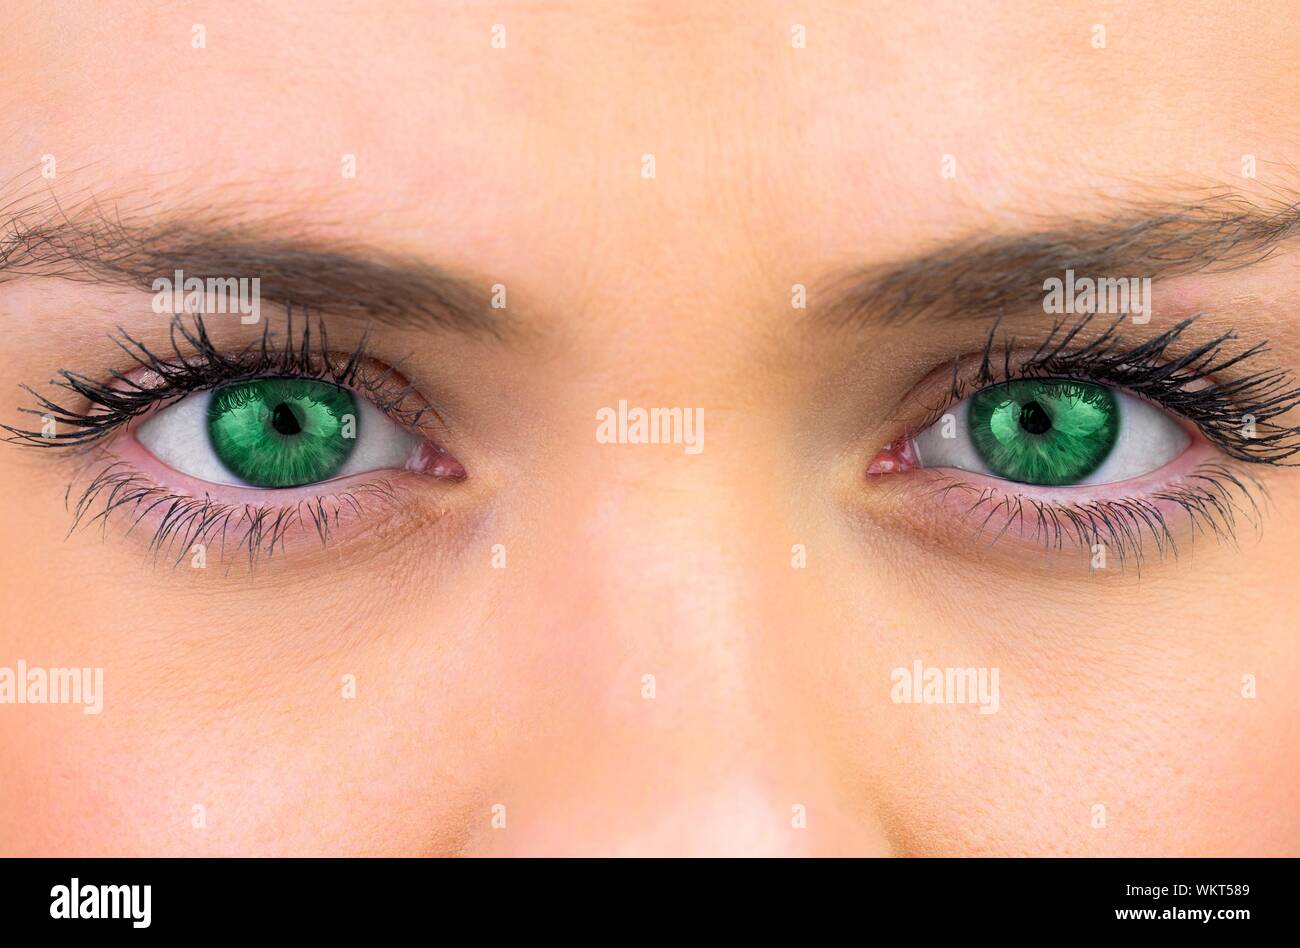 Bright green eyes on pretty female face looking at camera Stock Photo